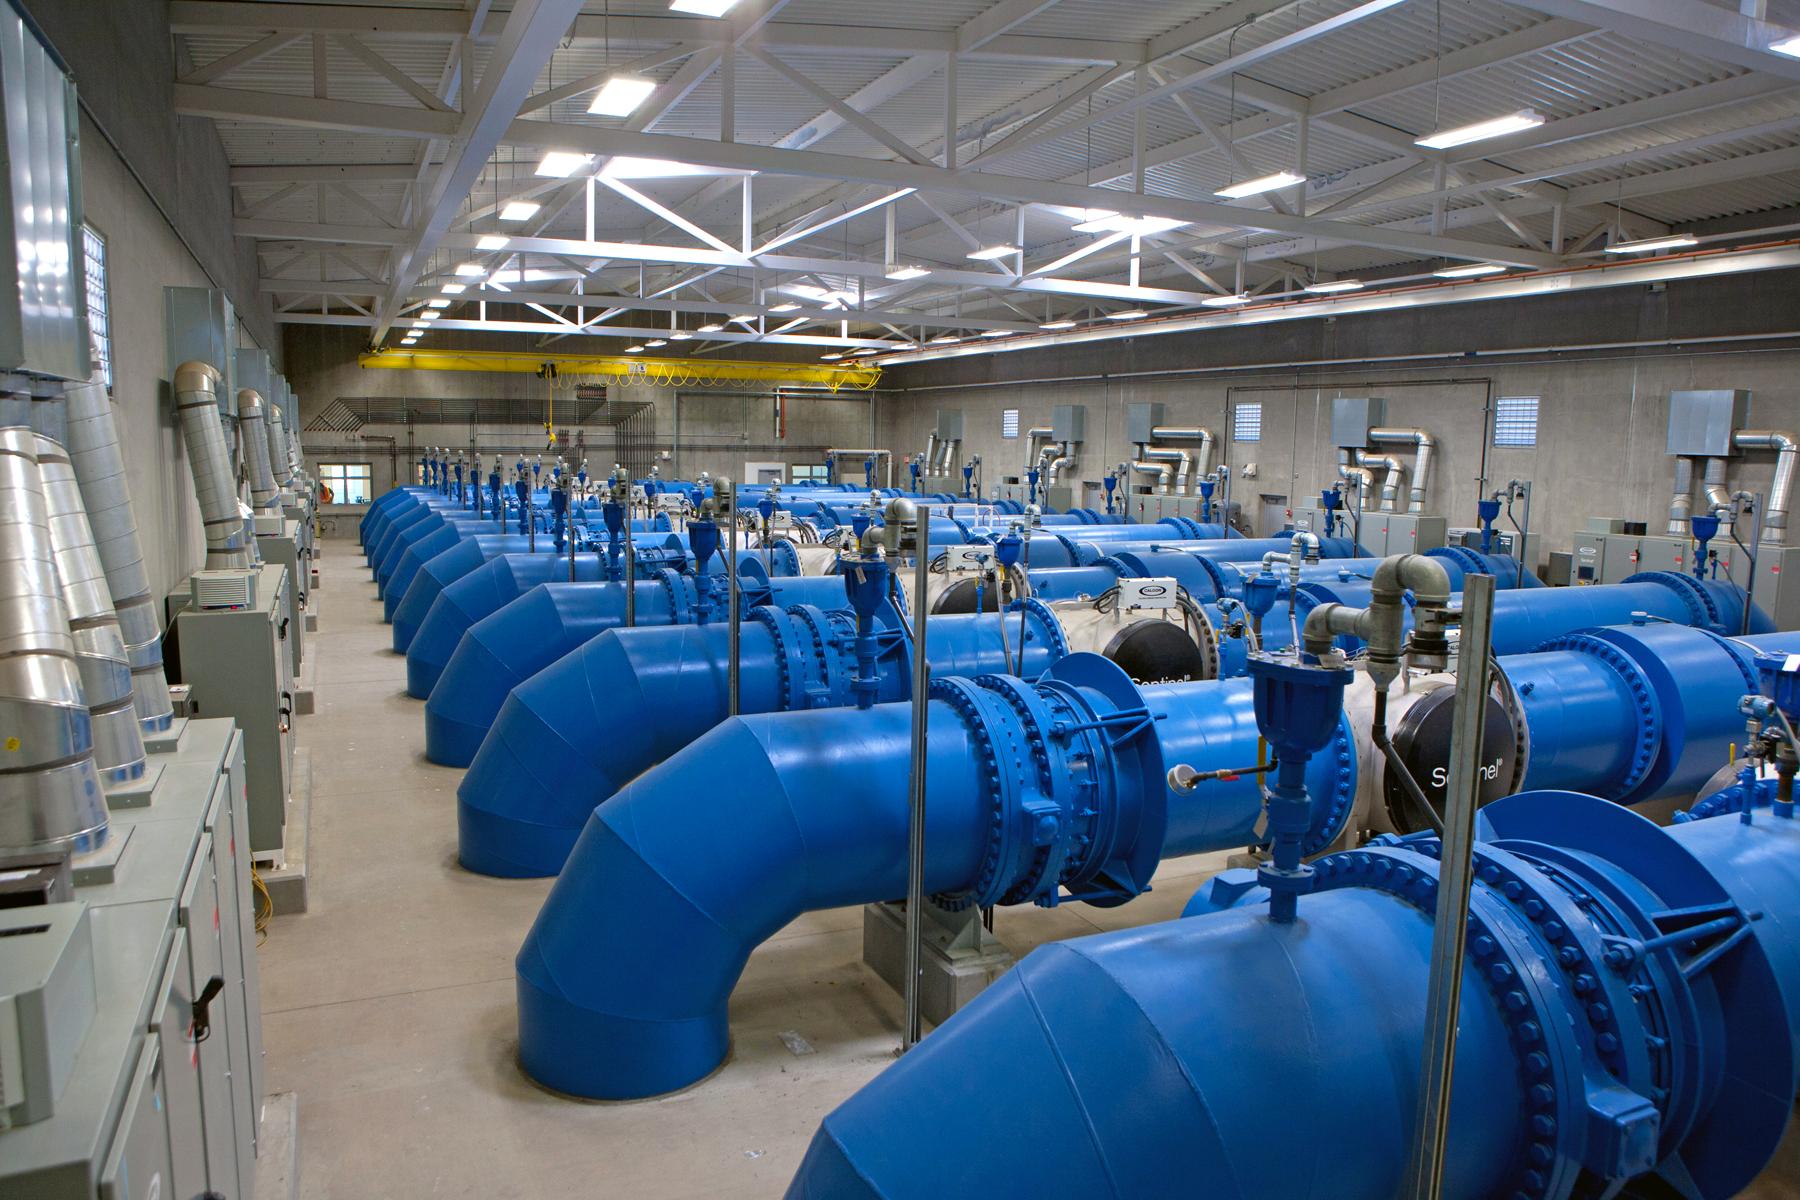 Webinar Recording: The impact of COVID-19 on water and wastewater utilities